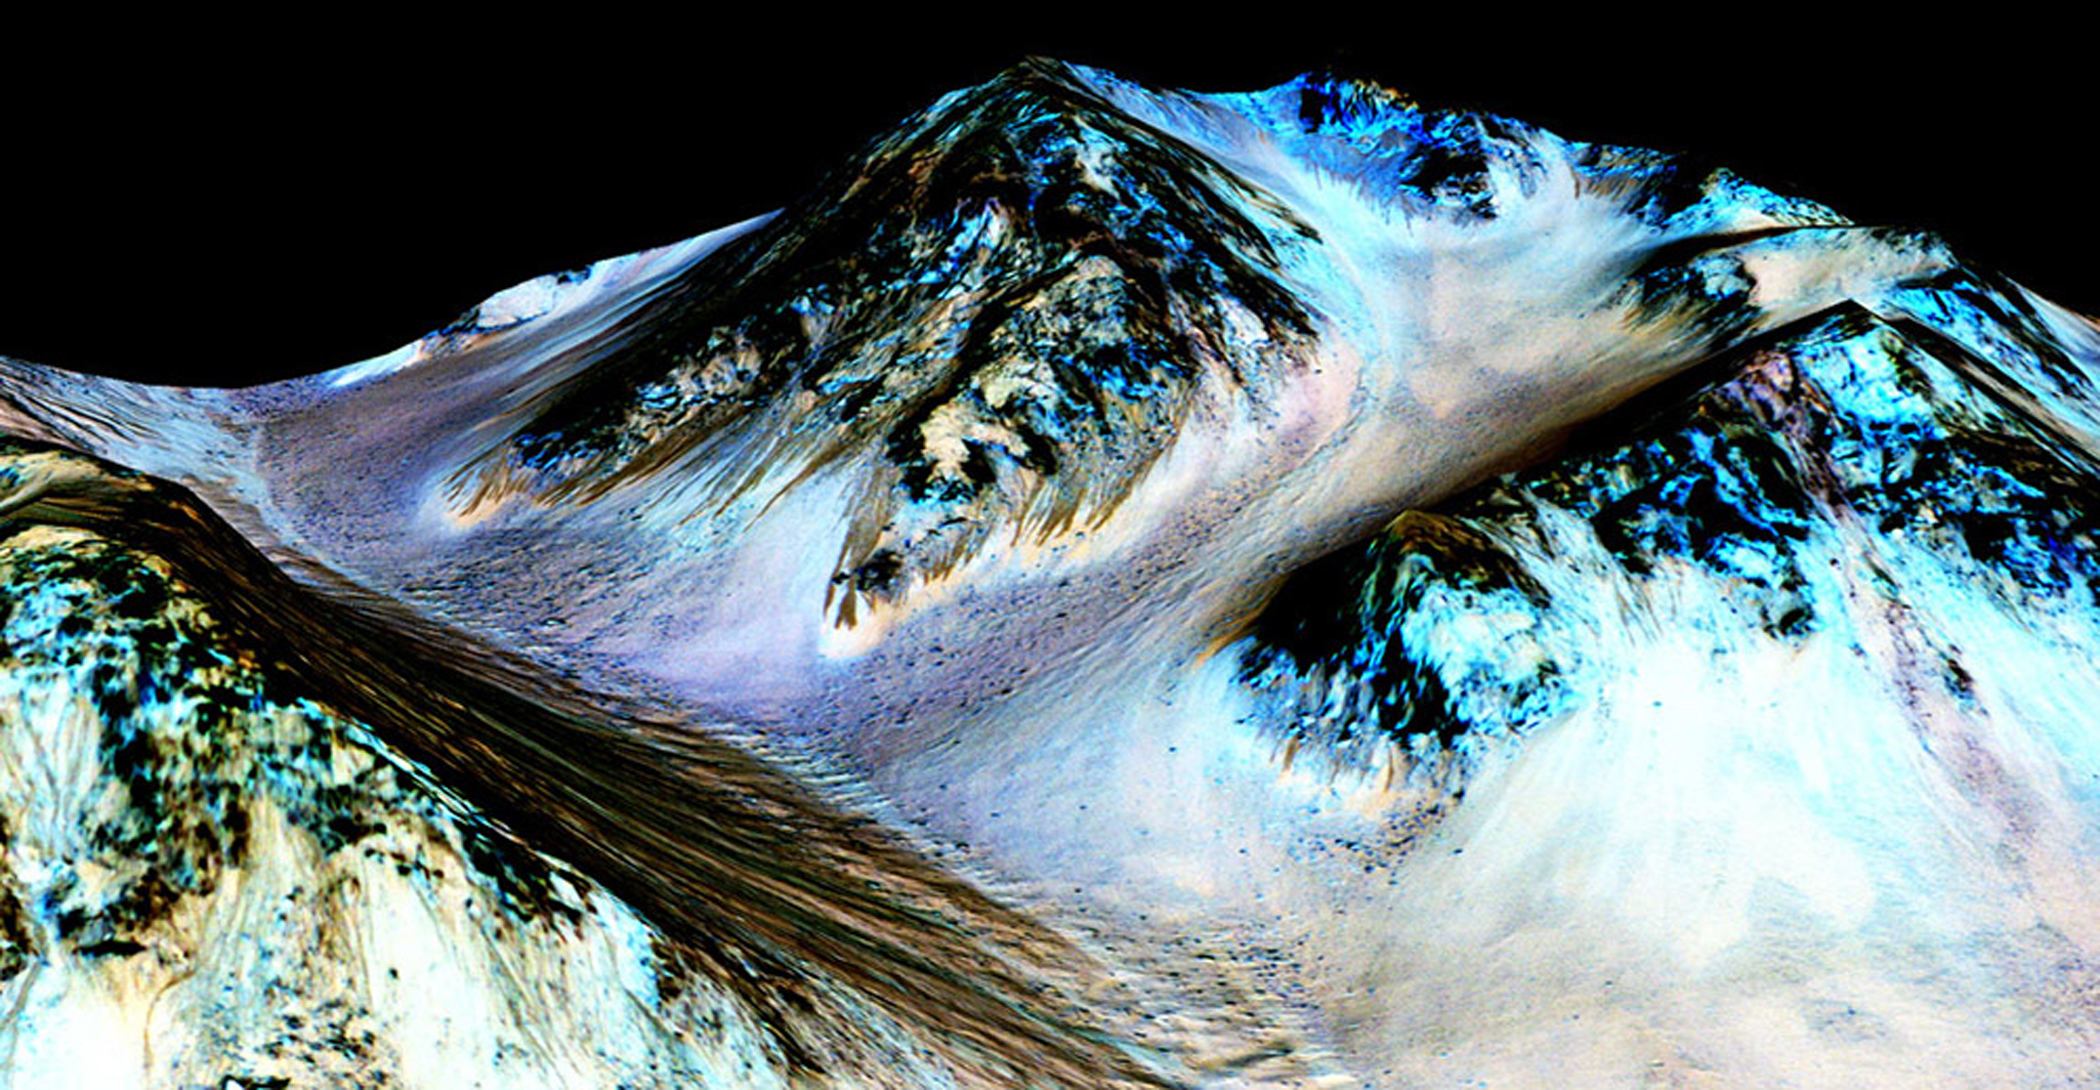 A 3-D computer model (a digital terrain map) of Hale Crater on Mars based on stereo information from two HiRISE observations showing dark, narrow streaks on the Martian slopes that are inferred to be formed by seasonal flow of water on contemporary Mars was released on Sept. 28, 2015.